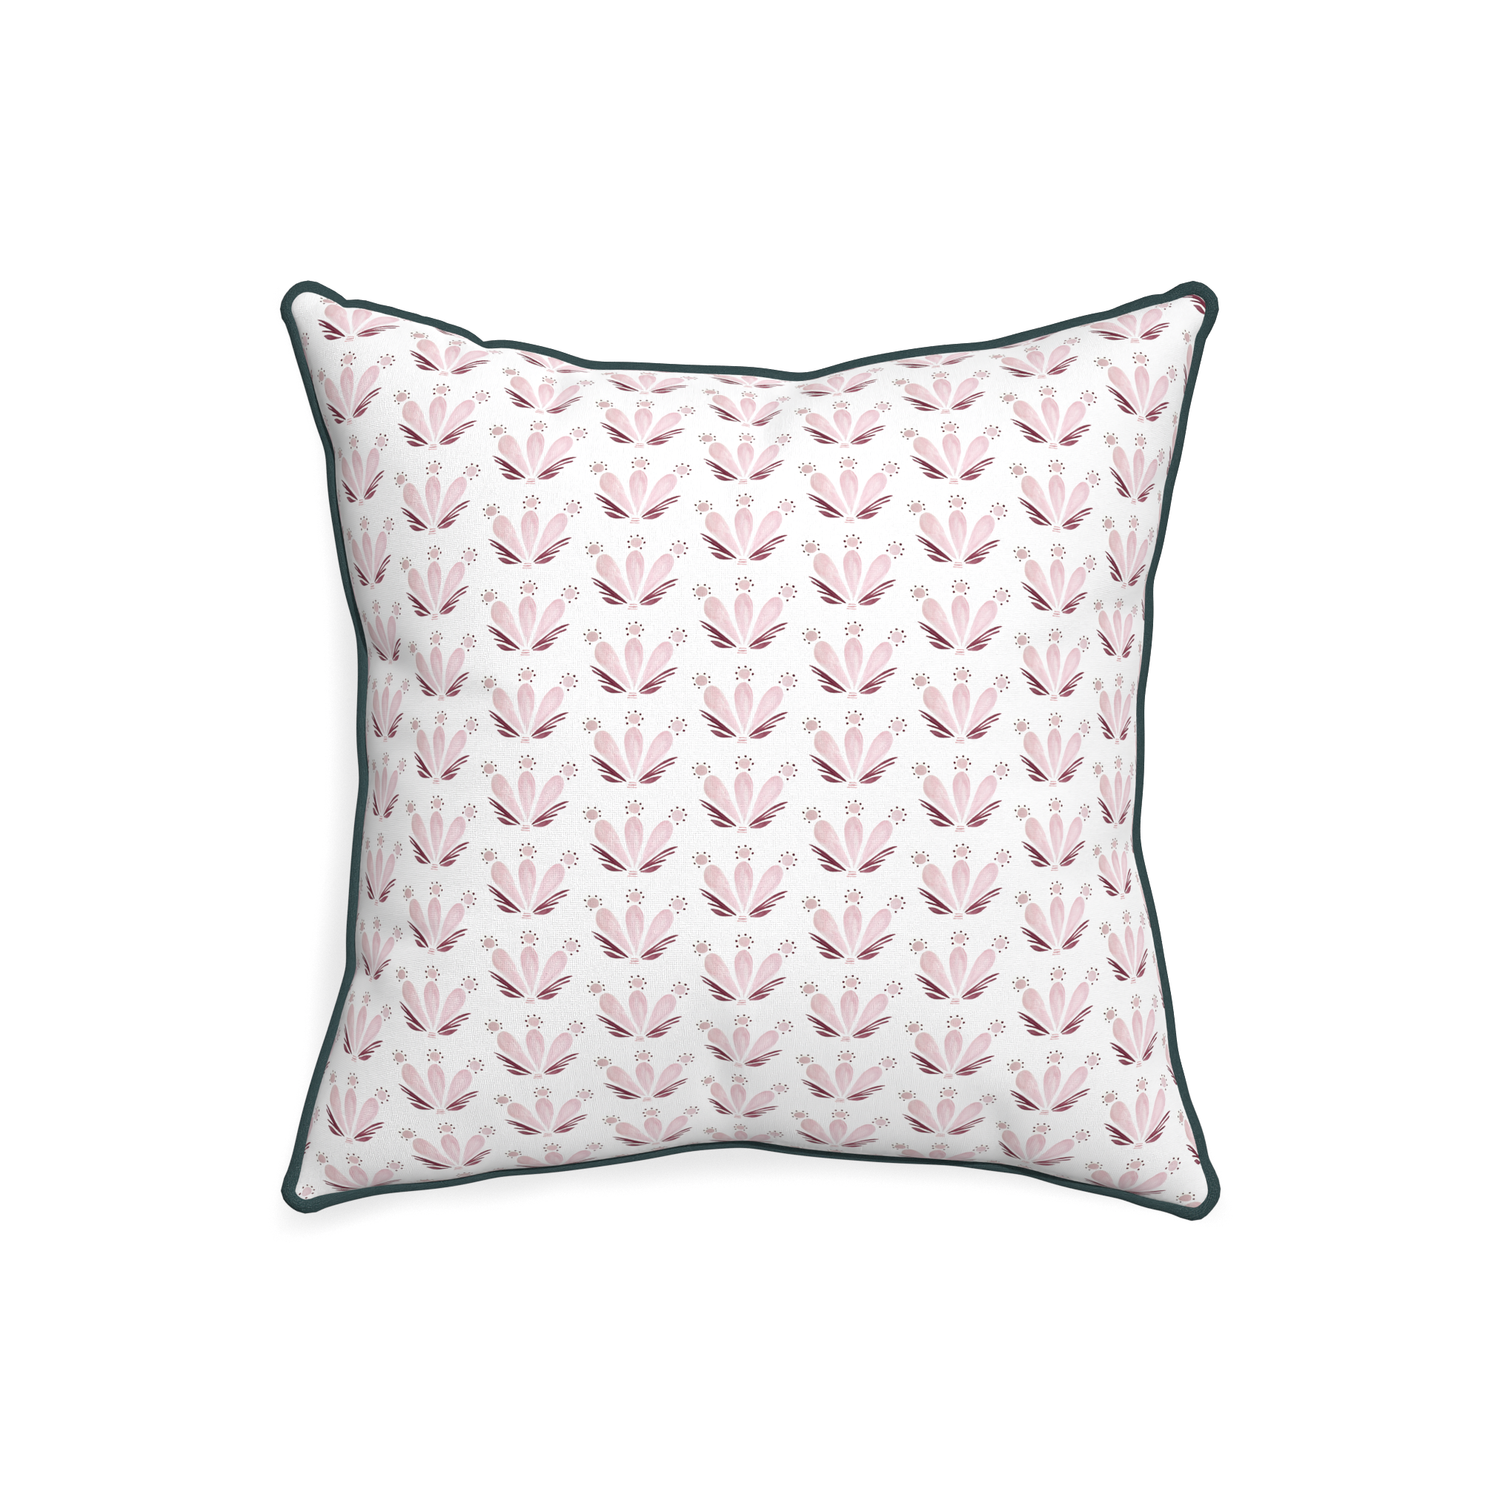 20-square serena pink custom pink & burgundy drop repeat floralpillow with p piping on white background